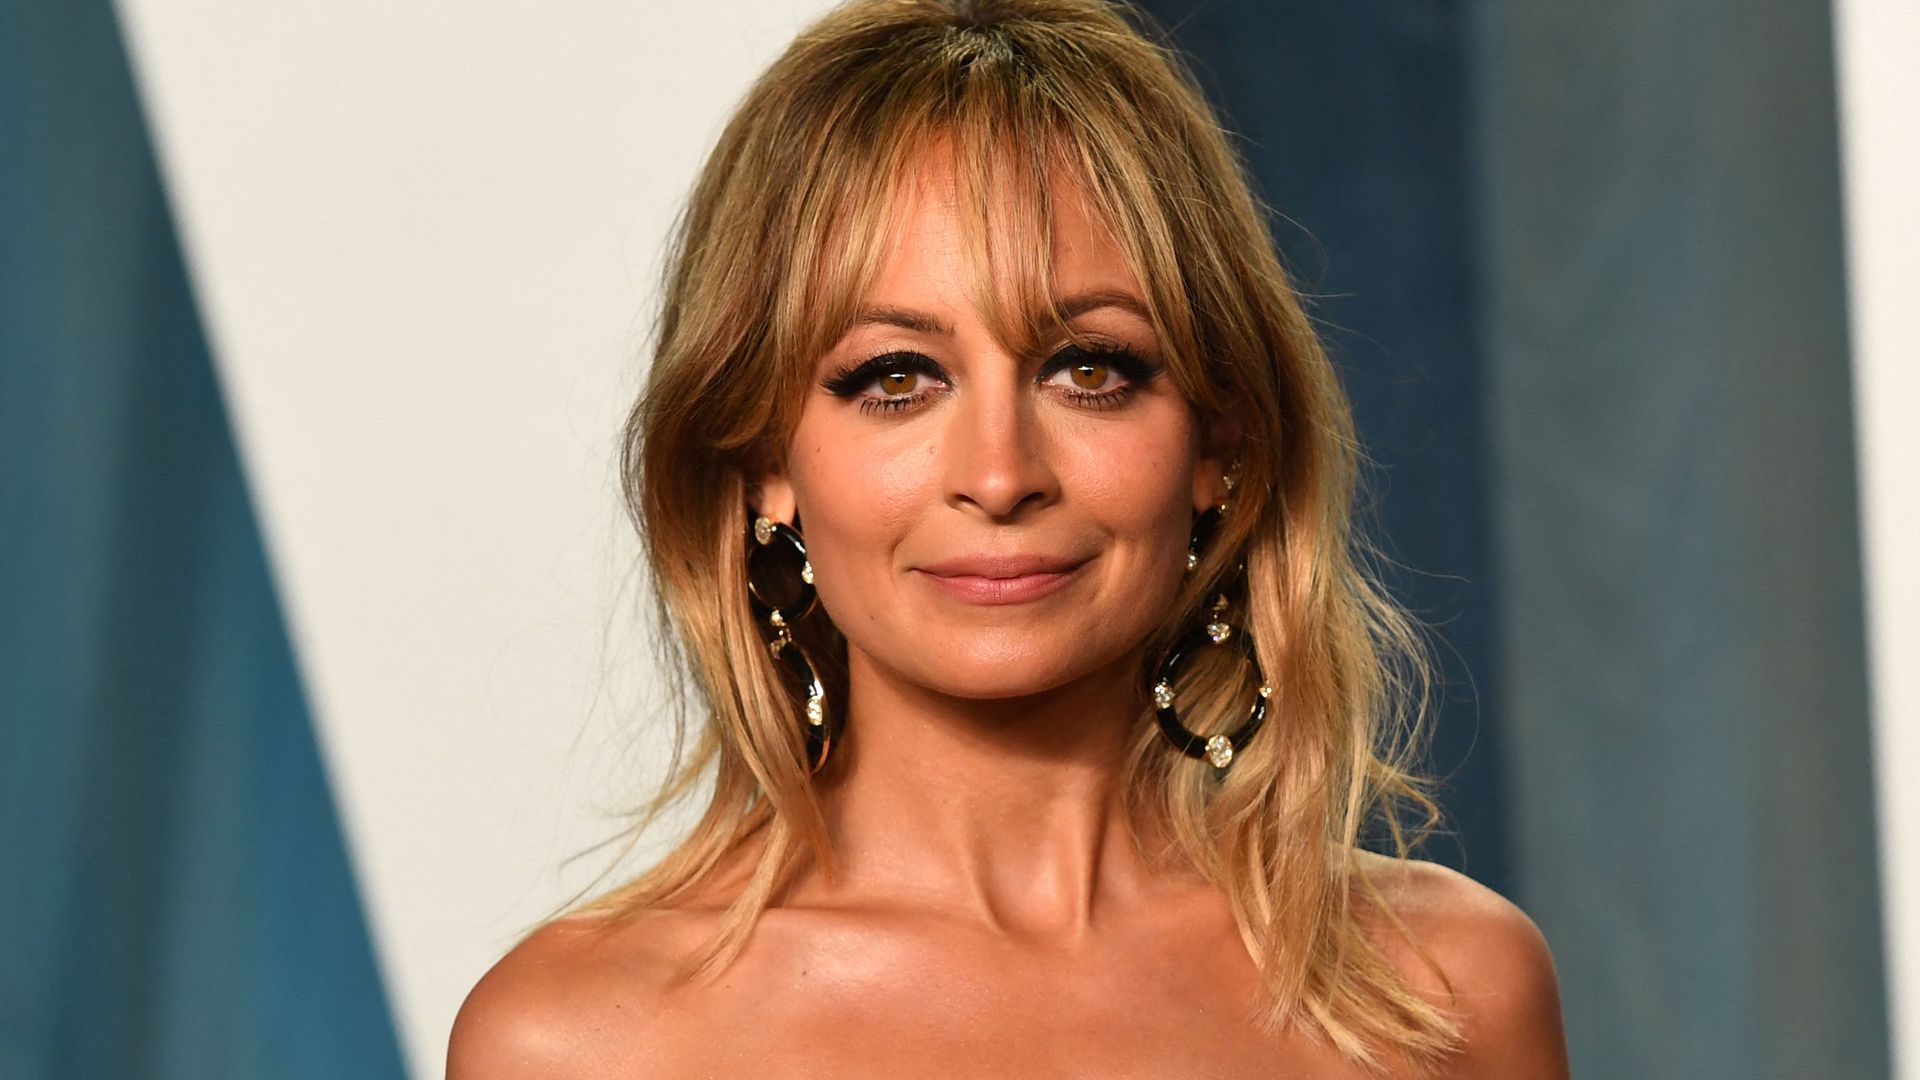 Nicole Richie in a black strapless dress at the 2022 Vanity Fair Oscar Party 